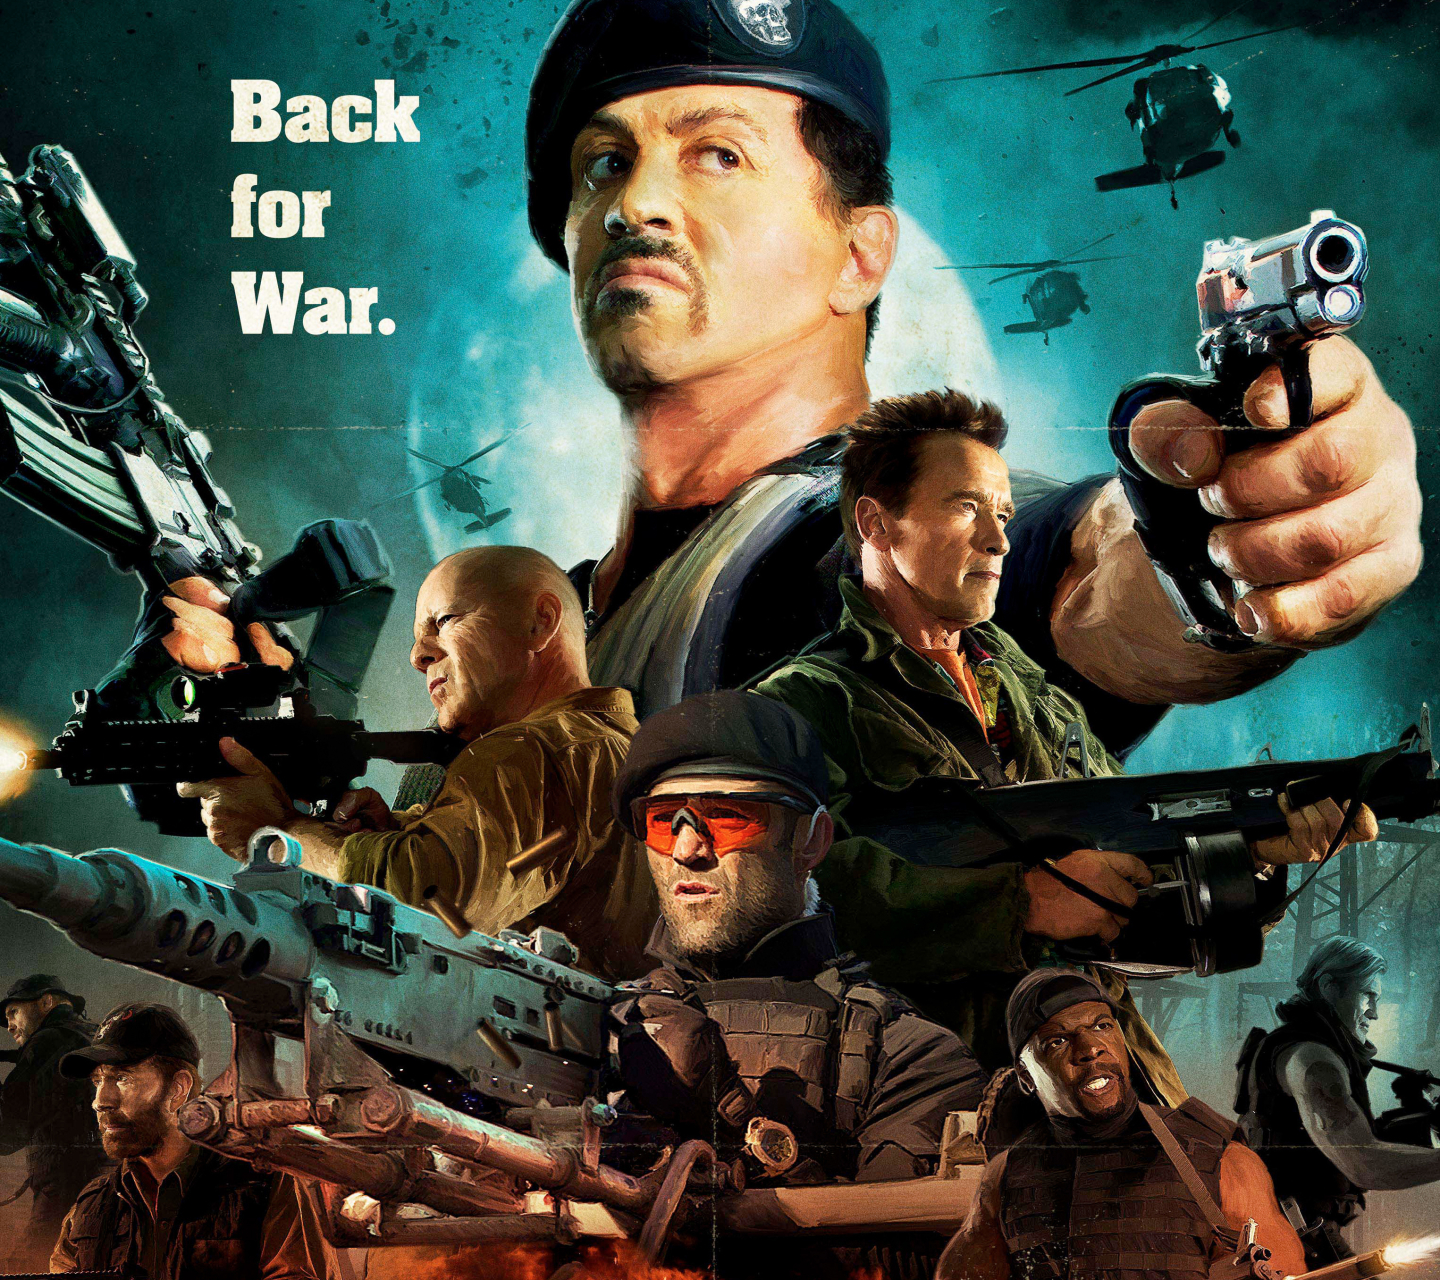 movie, the expendables 2, chuck norris, randy couture, bruce willis, sylvester stallone, arnold schwarzenegger, dolph lundgren, jason statham, terry crews, hale caesar, barney ross, trench (the expendables), lee christmas, gunnar jensen, toll road, booker (the expendables), church (the expendables), the expendables QHD